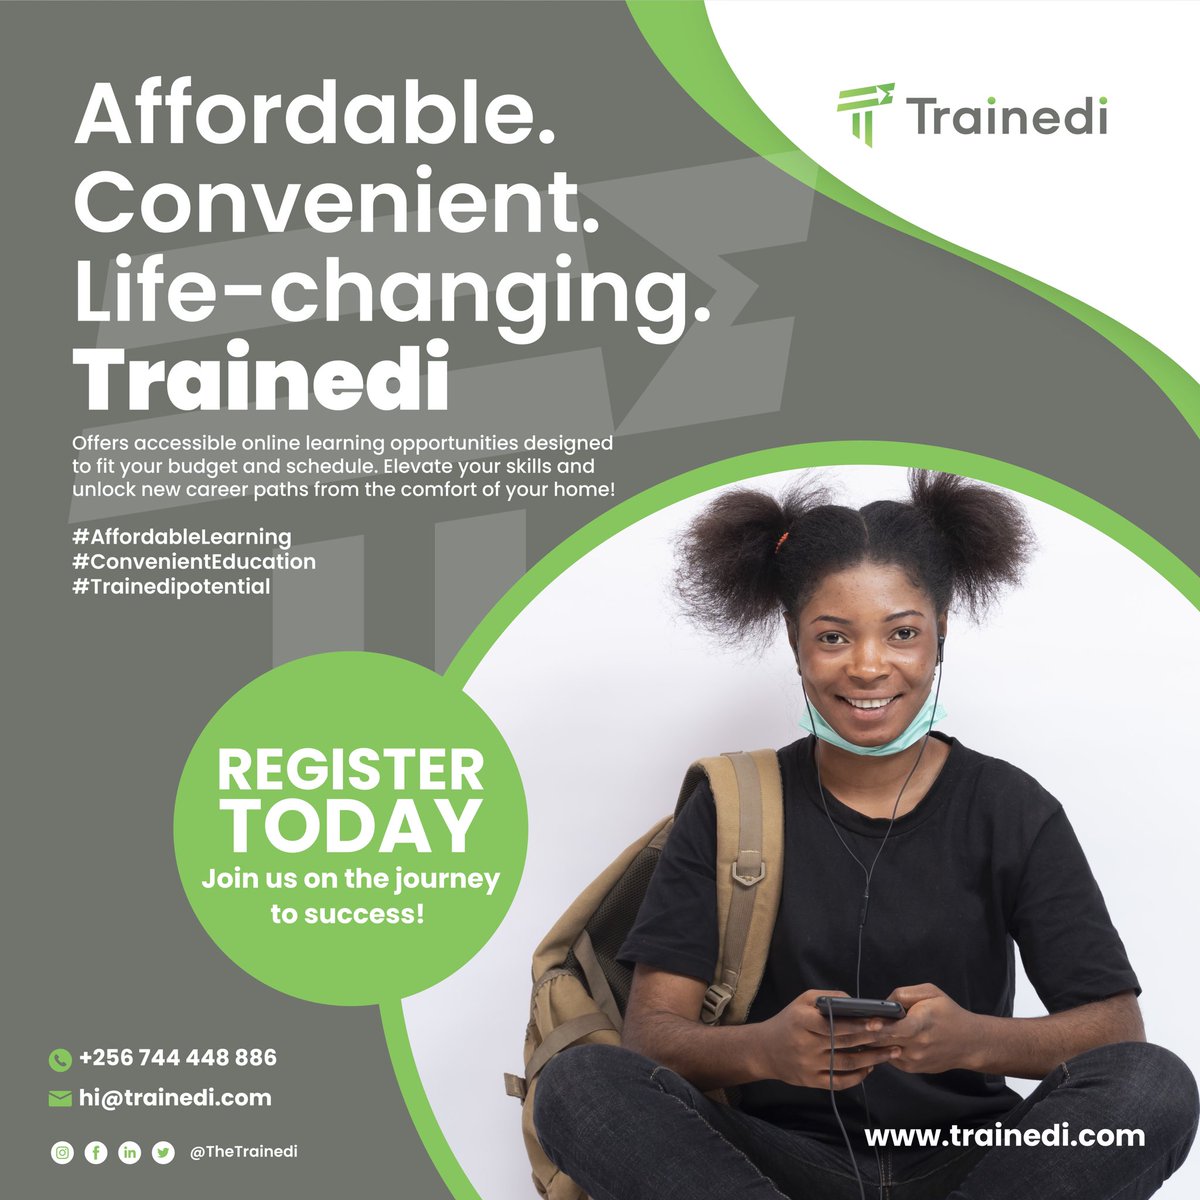 There's an E-learning shop called @TheTrainedi. It has short online courses you can enroll and equip yourself with employable skills. You can learn Google data sheets, Excel, Communication skills, graphics etc. Registration is free here: trainedi.com/register/